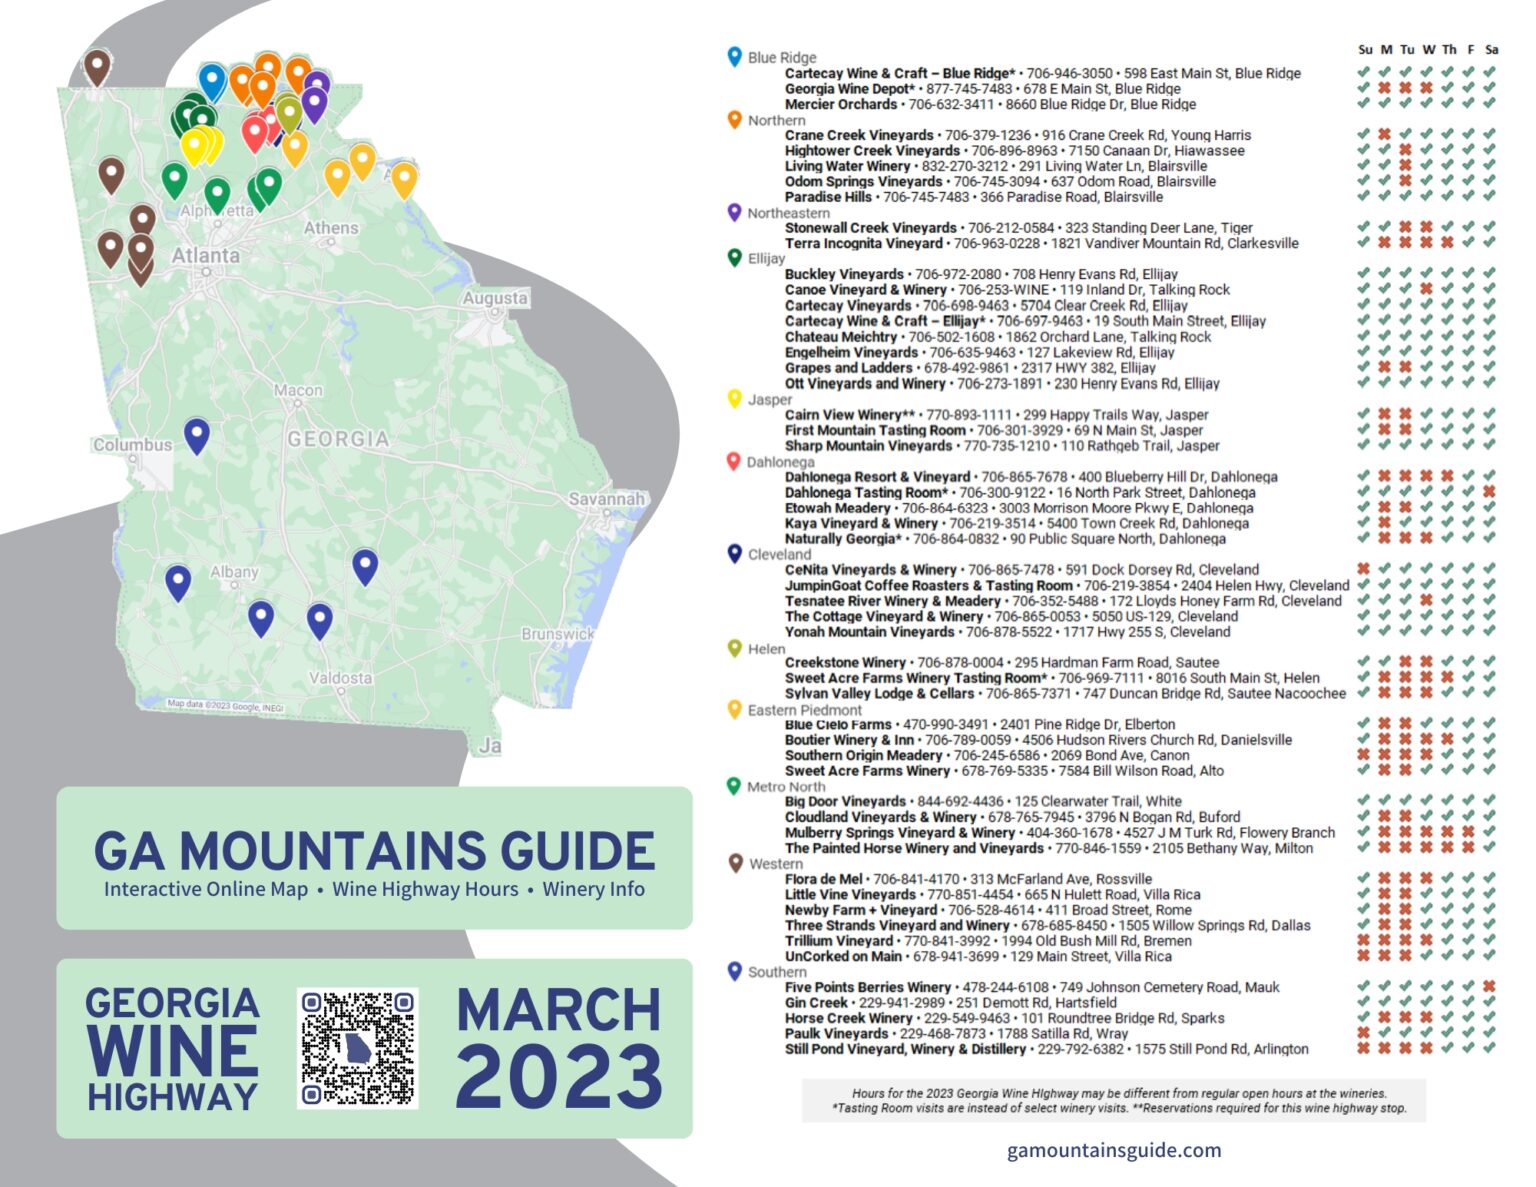 Ultimate Guide to the 2023 Wine Highway March 131